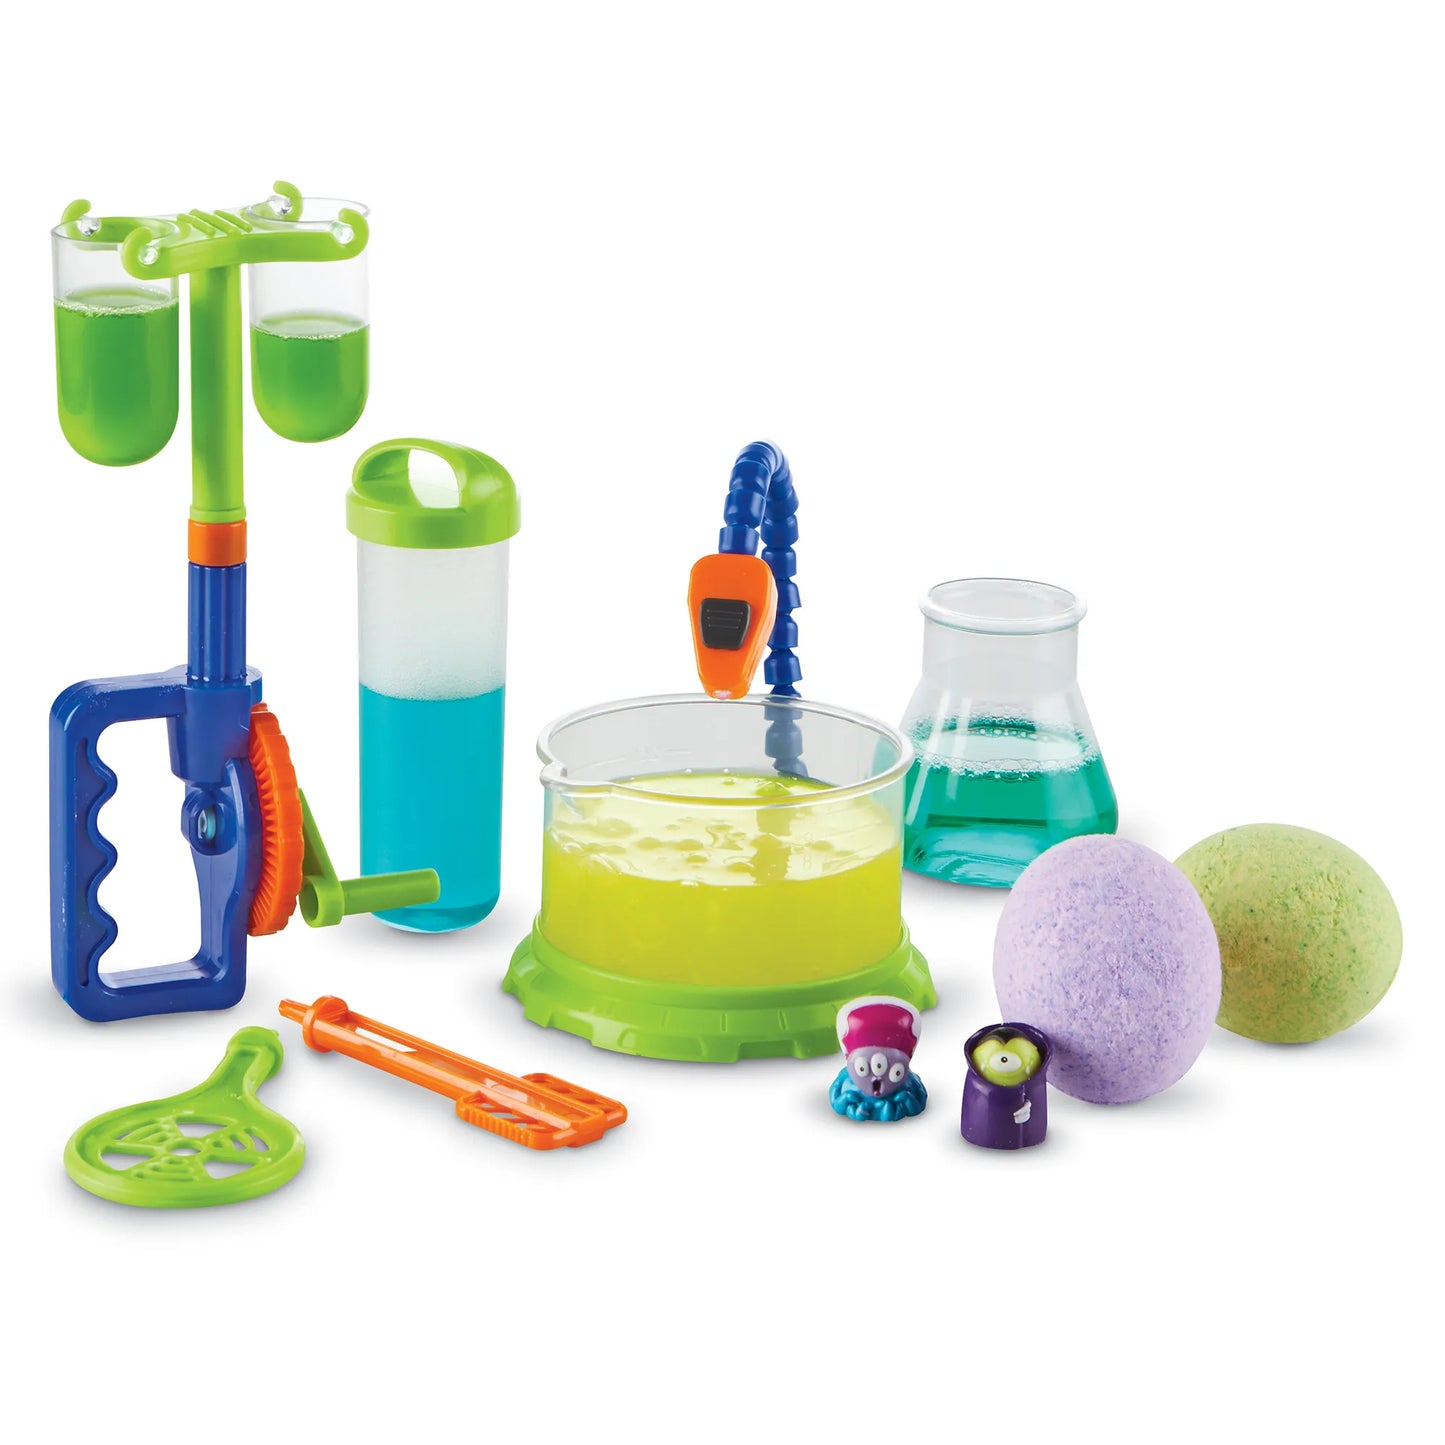 Learning Resources Beaker Creatures Monsterglow Lab